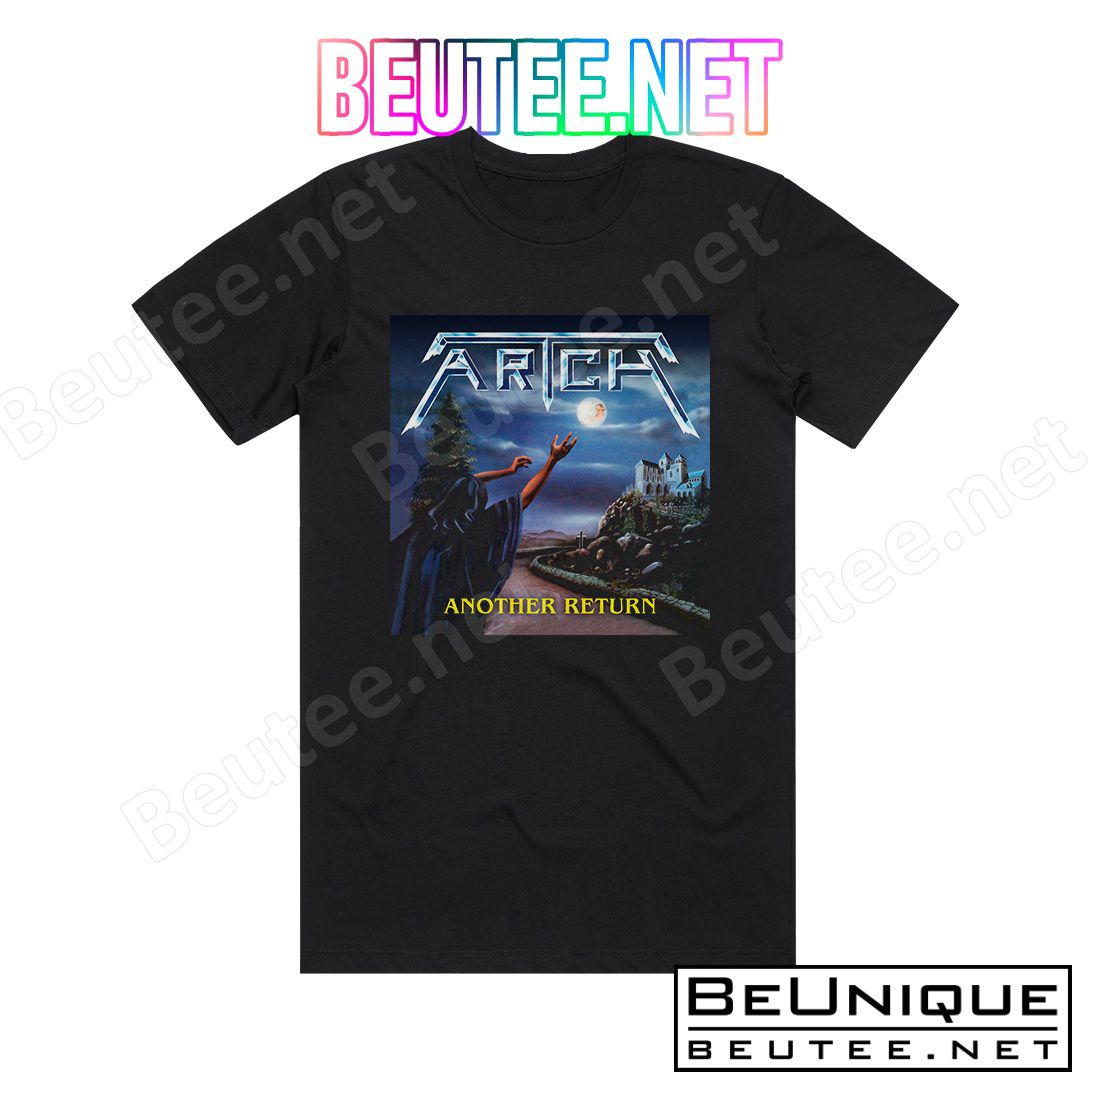 Artch Another Return Album Cover T-Shirt